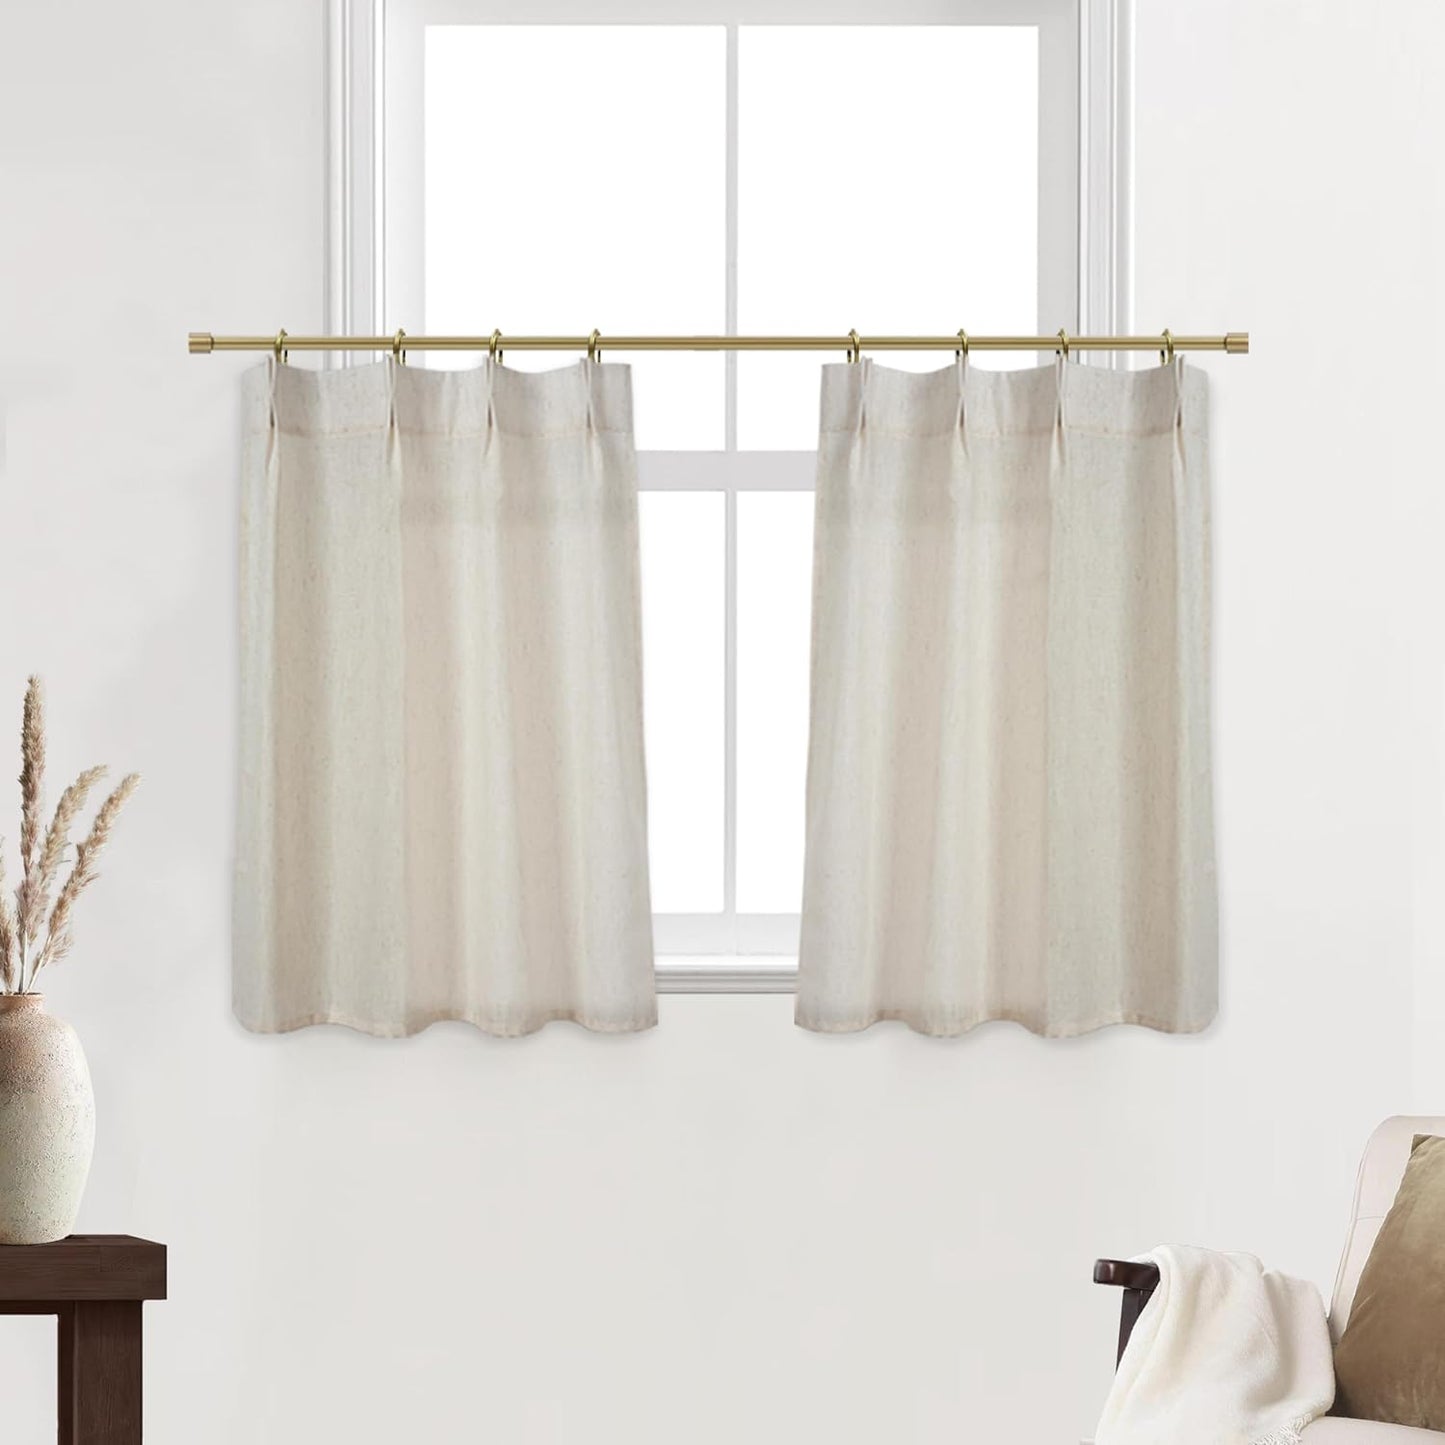 Short Curtains for Windows,Semi Sheer White Linen Cotton Privacy Light Filtering Cafe Length Small Pinch Pleated Curtains for Living Room Bathroom with Hooks,24 X 24 Inch Long  Lino Rosa Beige 24"W X 24"L 